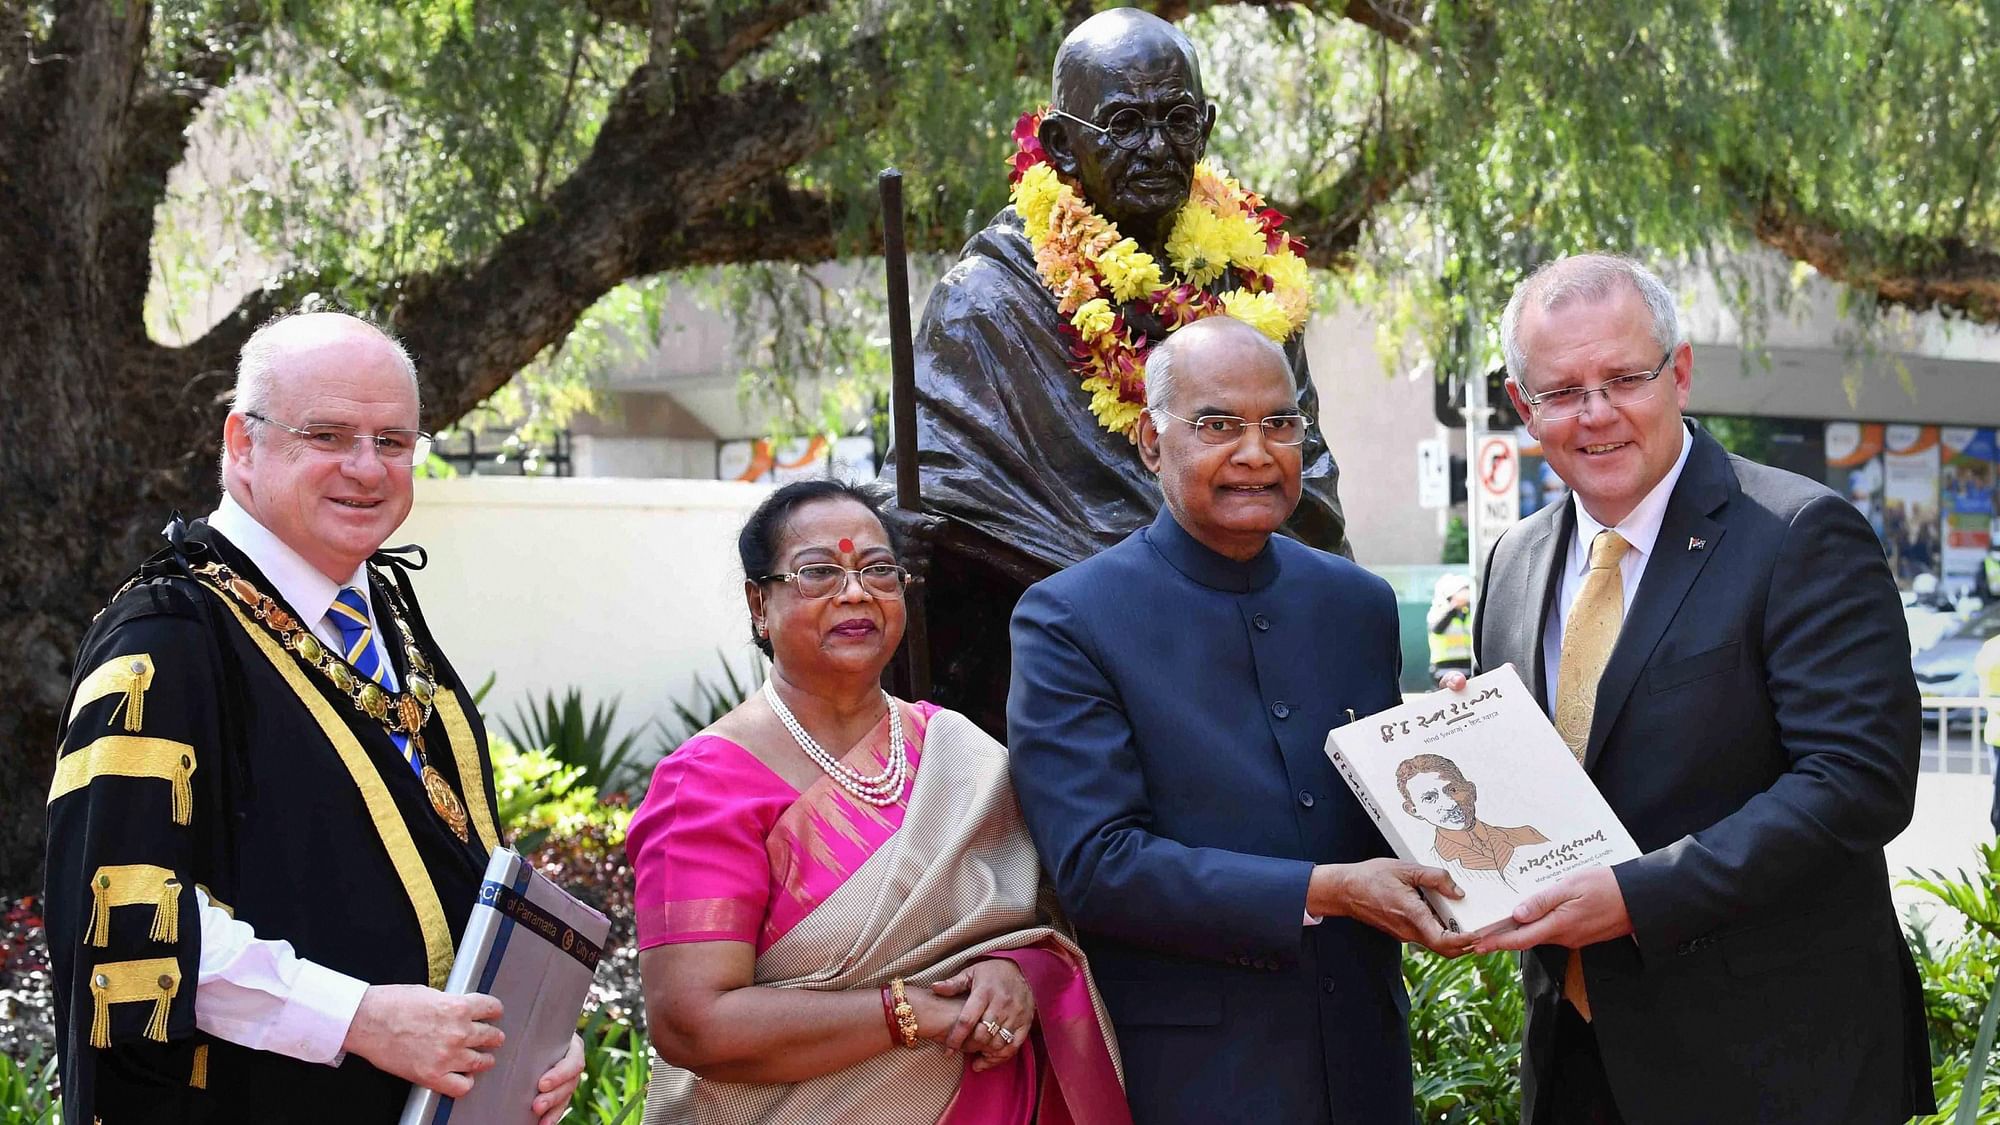 President Ram Nath Kovind (second from right), First Lady Savita Kovind, Parramatta Mayor Andrew Wilson, and Australian Prime Minister Scott Morrison (right) during the unveiling of the Mahatma Gandhi statue at Jublie Park in Sydney.